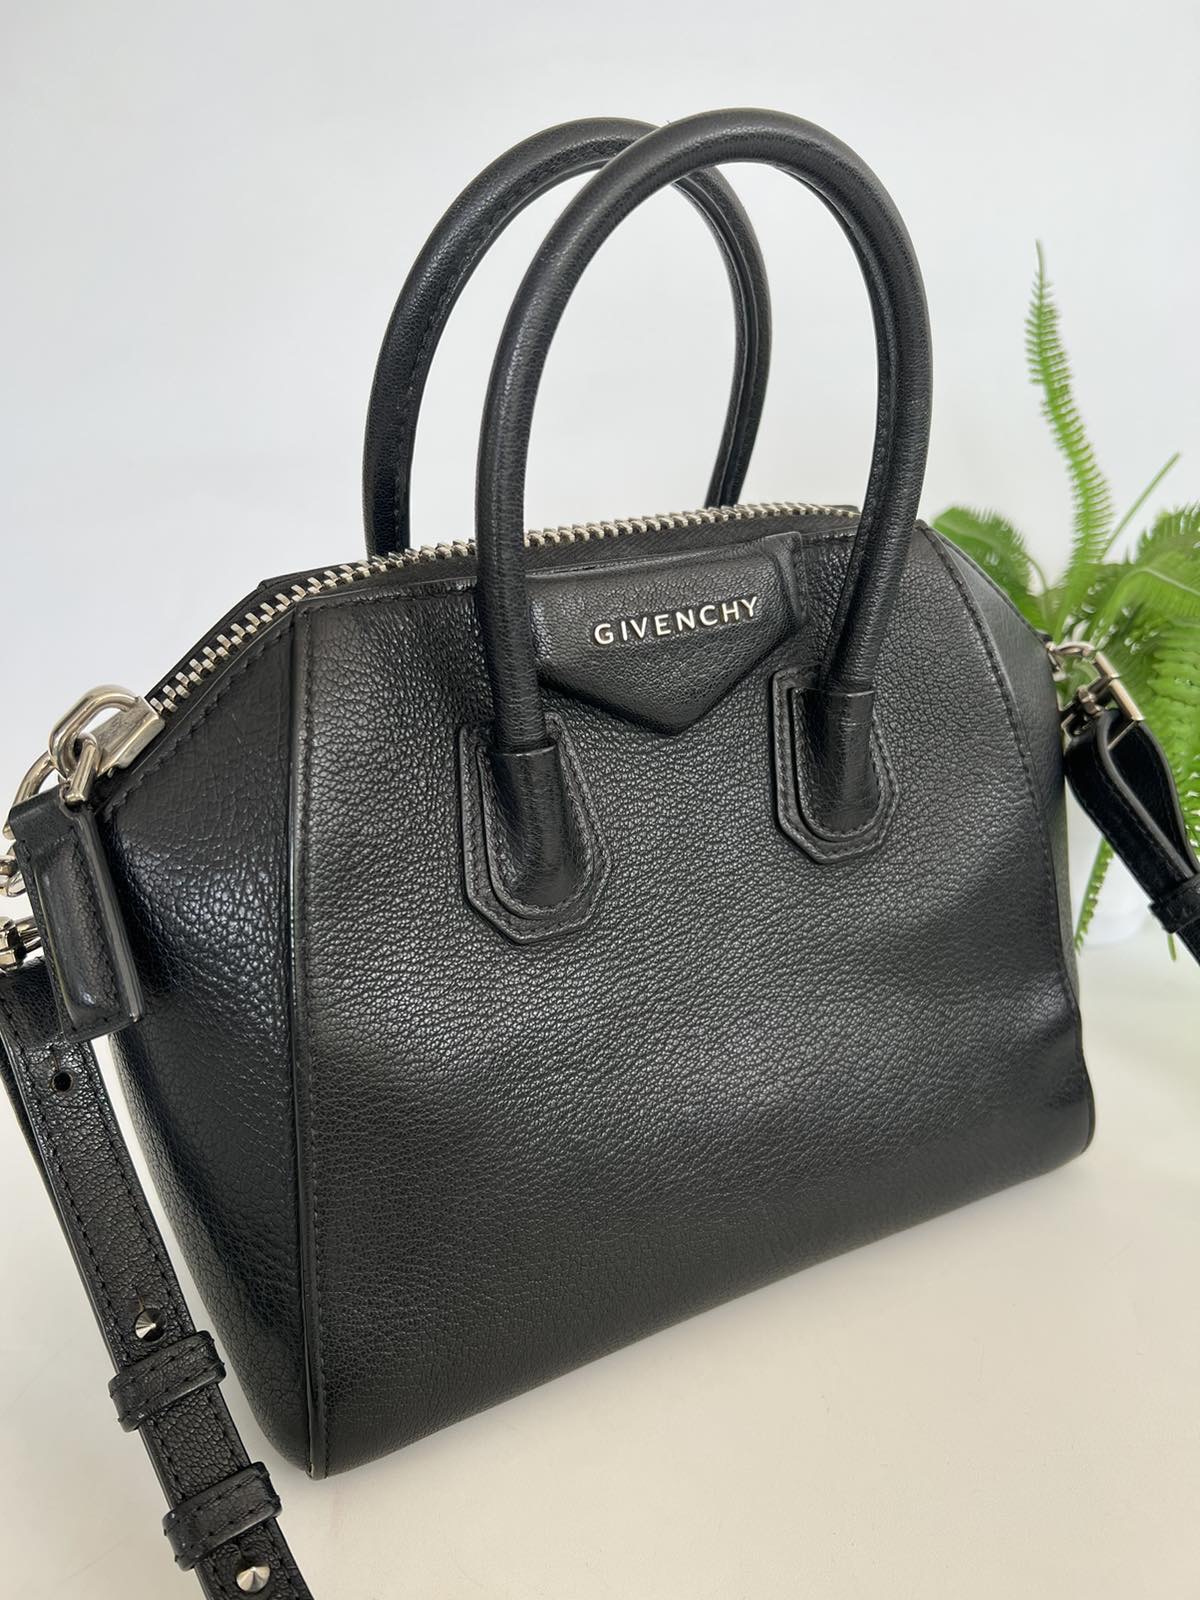 Givenchy Antigona Black Mini Silver Hardware. Made in Italy. With long  strap, swatch & tag ❤️ - Canon E-Bags Prime